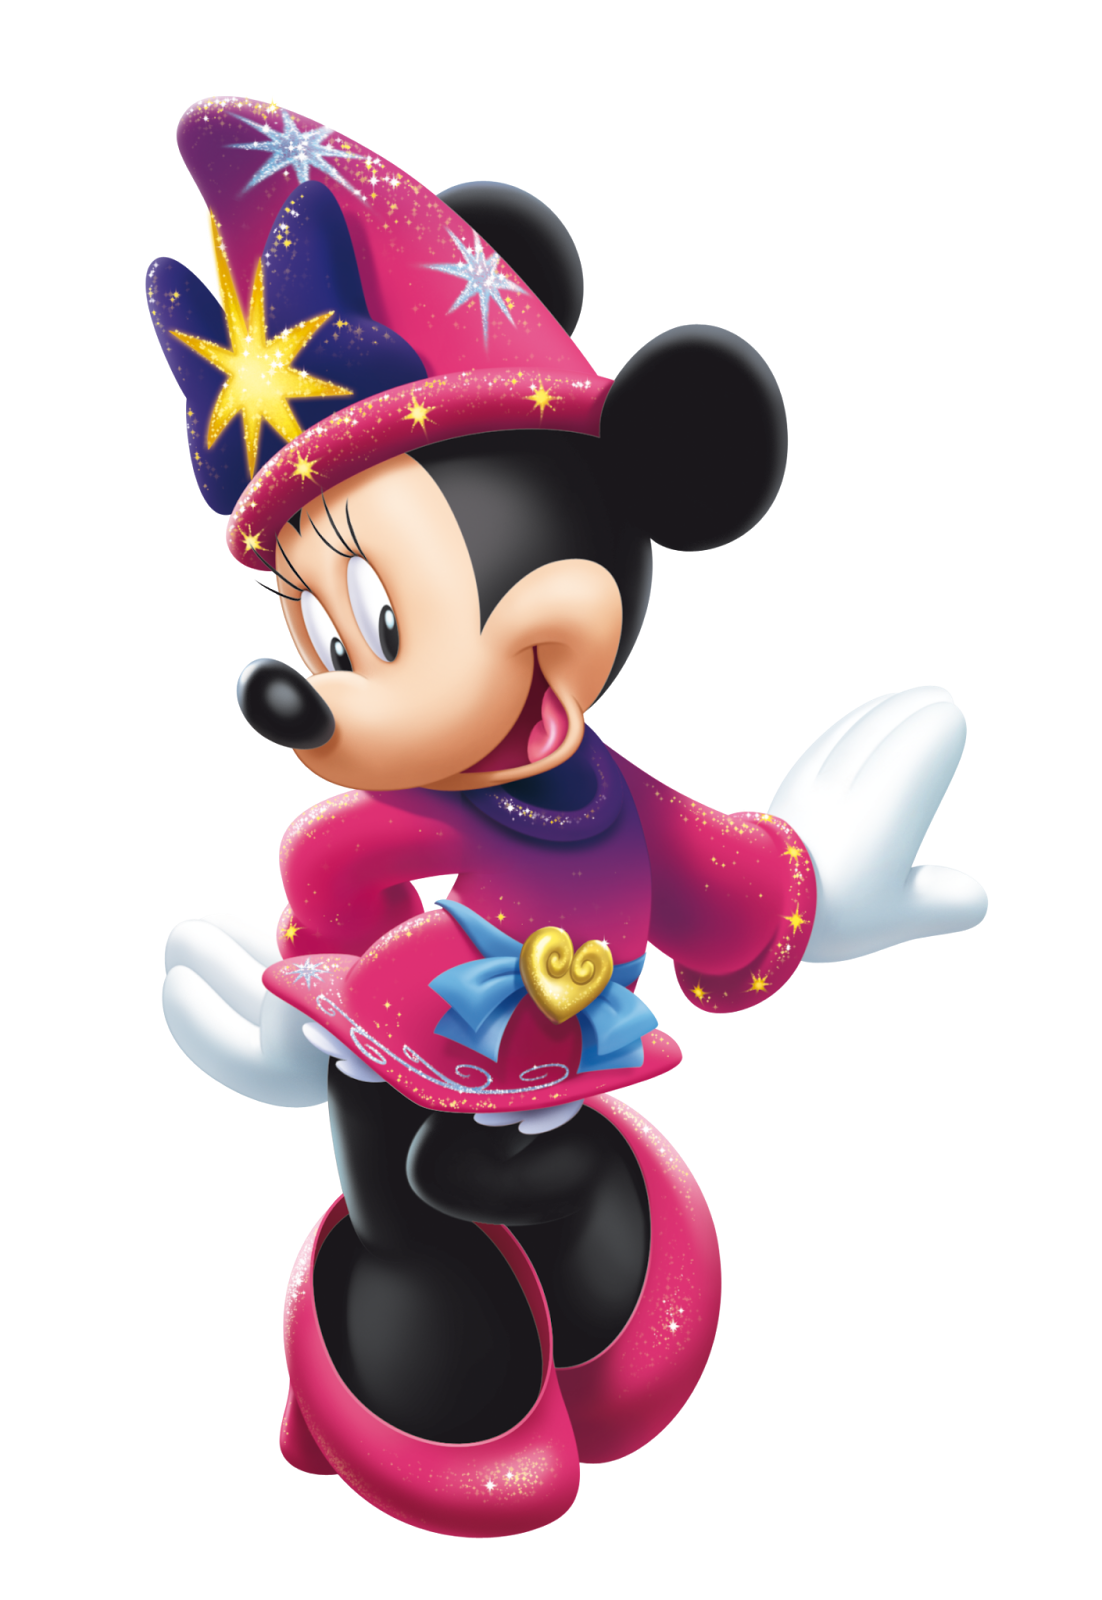 Minnie Mouse Celebrating The New Year, Great Celebration Dress, Minnie PNG Image #40242